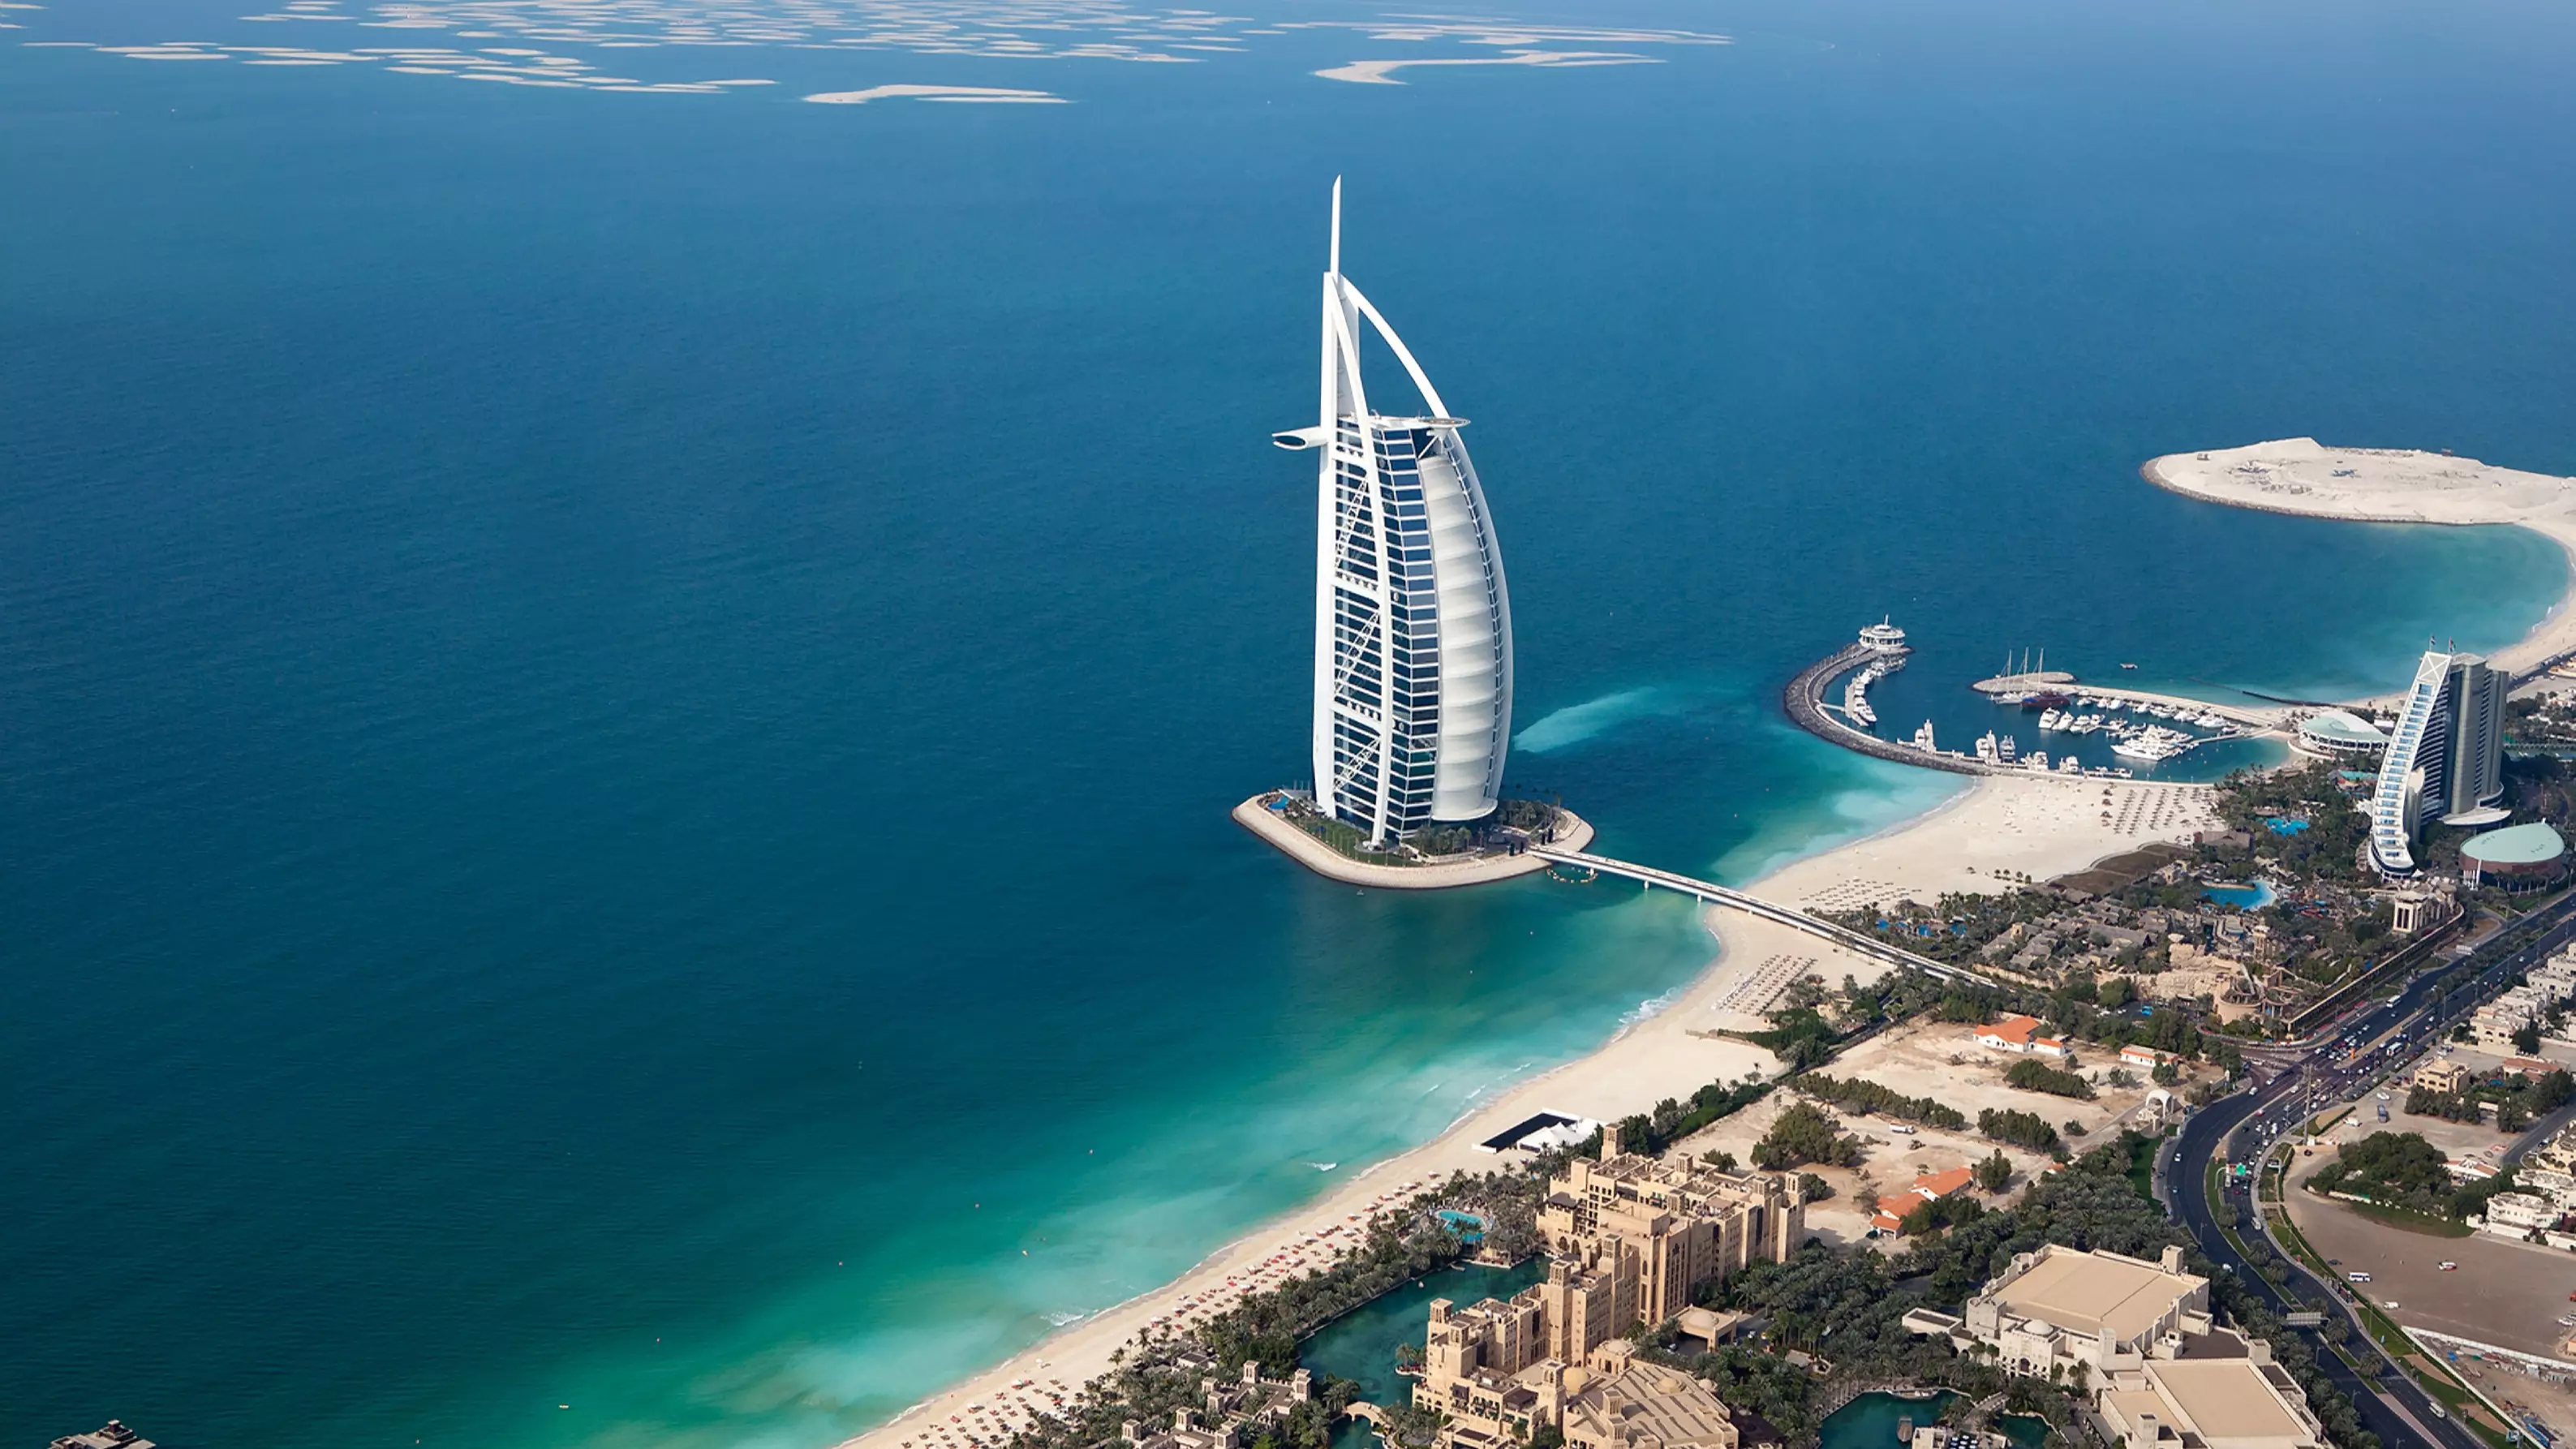 Influencer Travel Company Told Stars Not To Post 'Insensitive' Photos From Dubai 